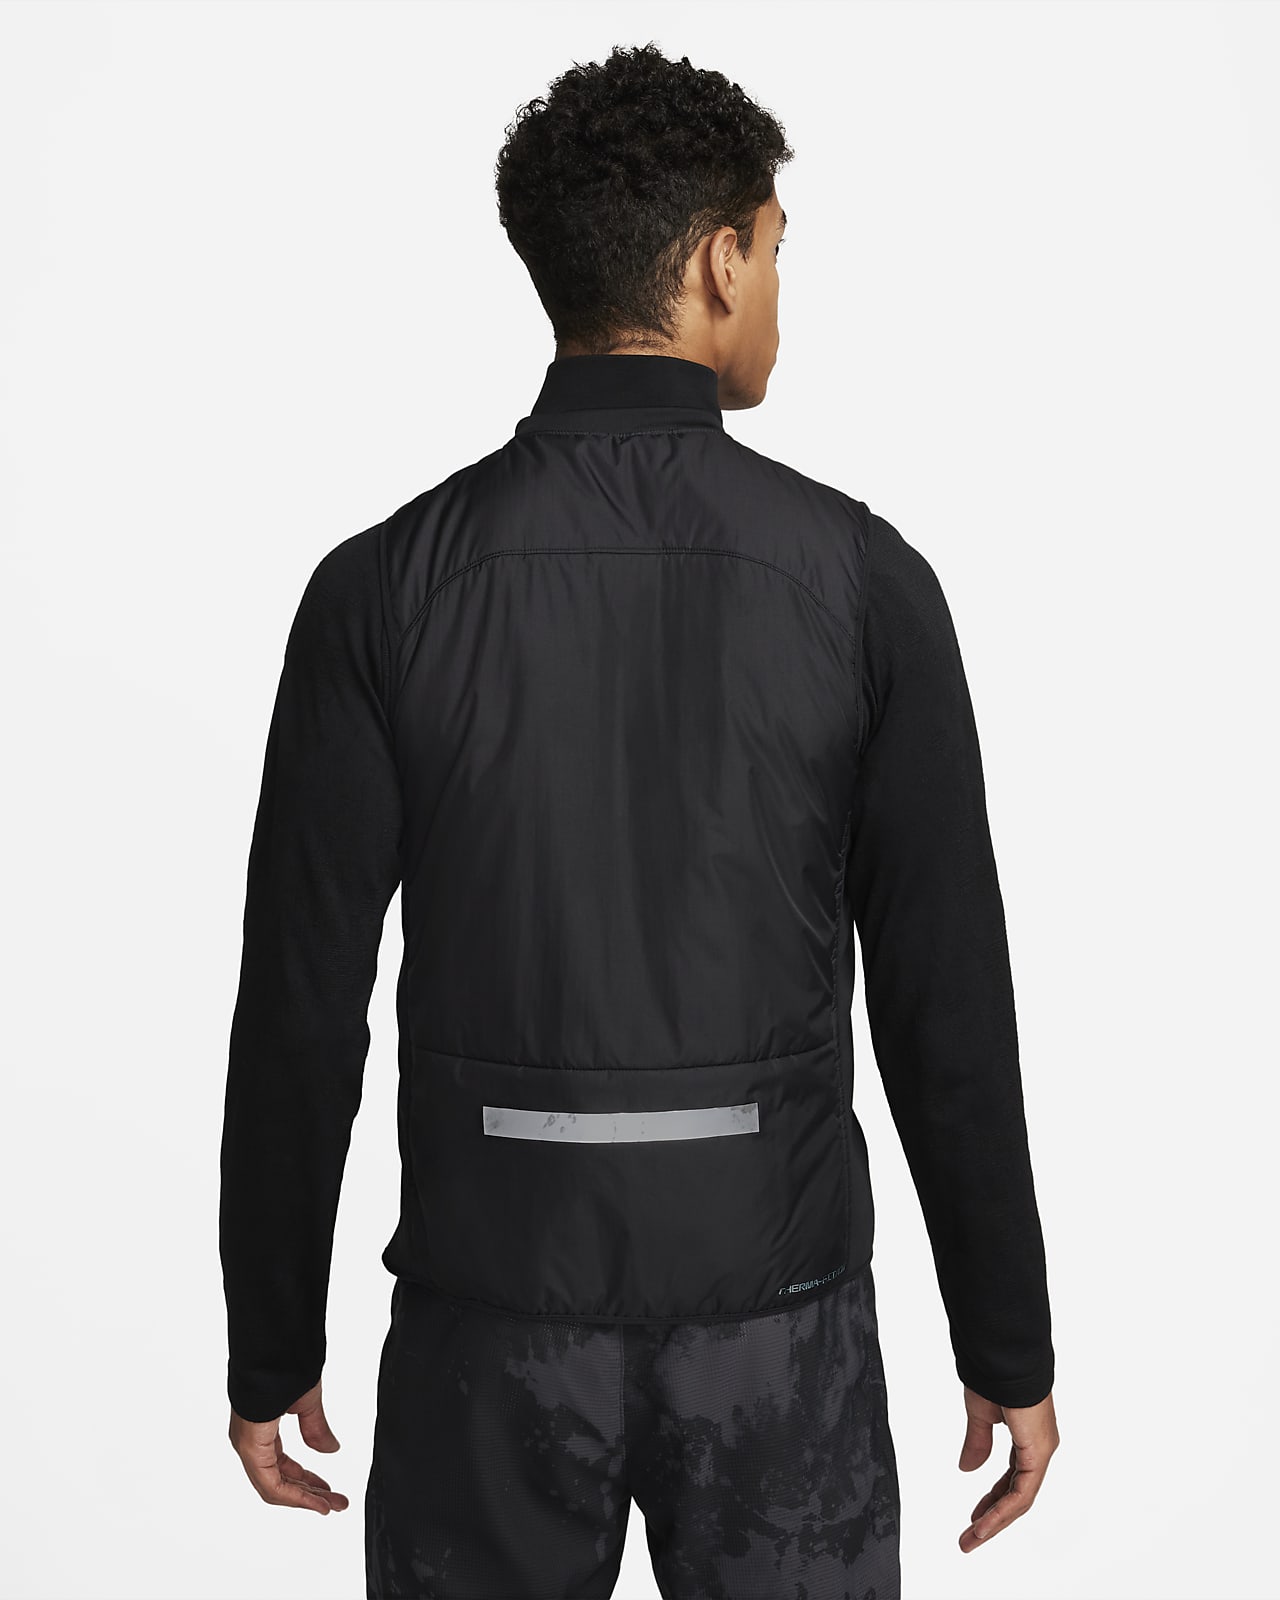 Veste de running sans manches Therma-FIT ADV Nike Running Division  AeroLayer pour homme